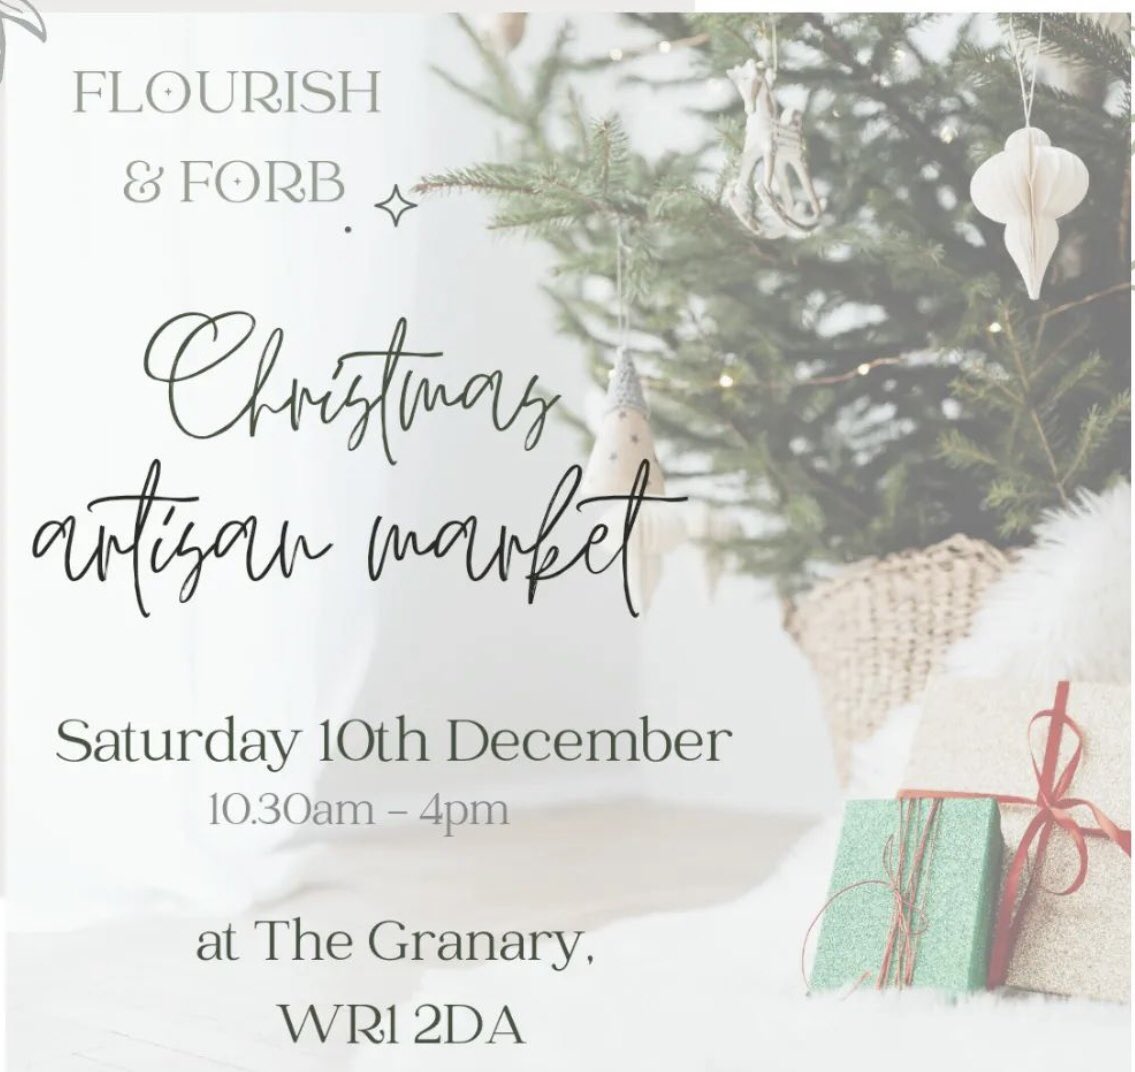 Christmas gift solutions and stocking fillers, handmade and unique. The Granary, St Martin’s Gate, Worcester. This Saturday! #shoplocal #shopsmall #flowbyflo #felicityosborne #supportsmallbusiness #SupportLocalBusinesses #art #acrylicart #worcester #WORCESTERSHIRE #xmasgift